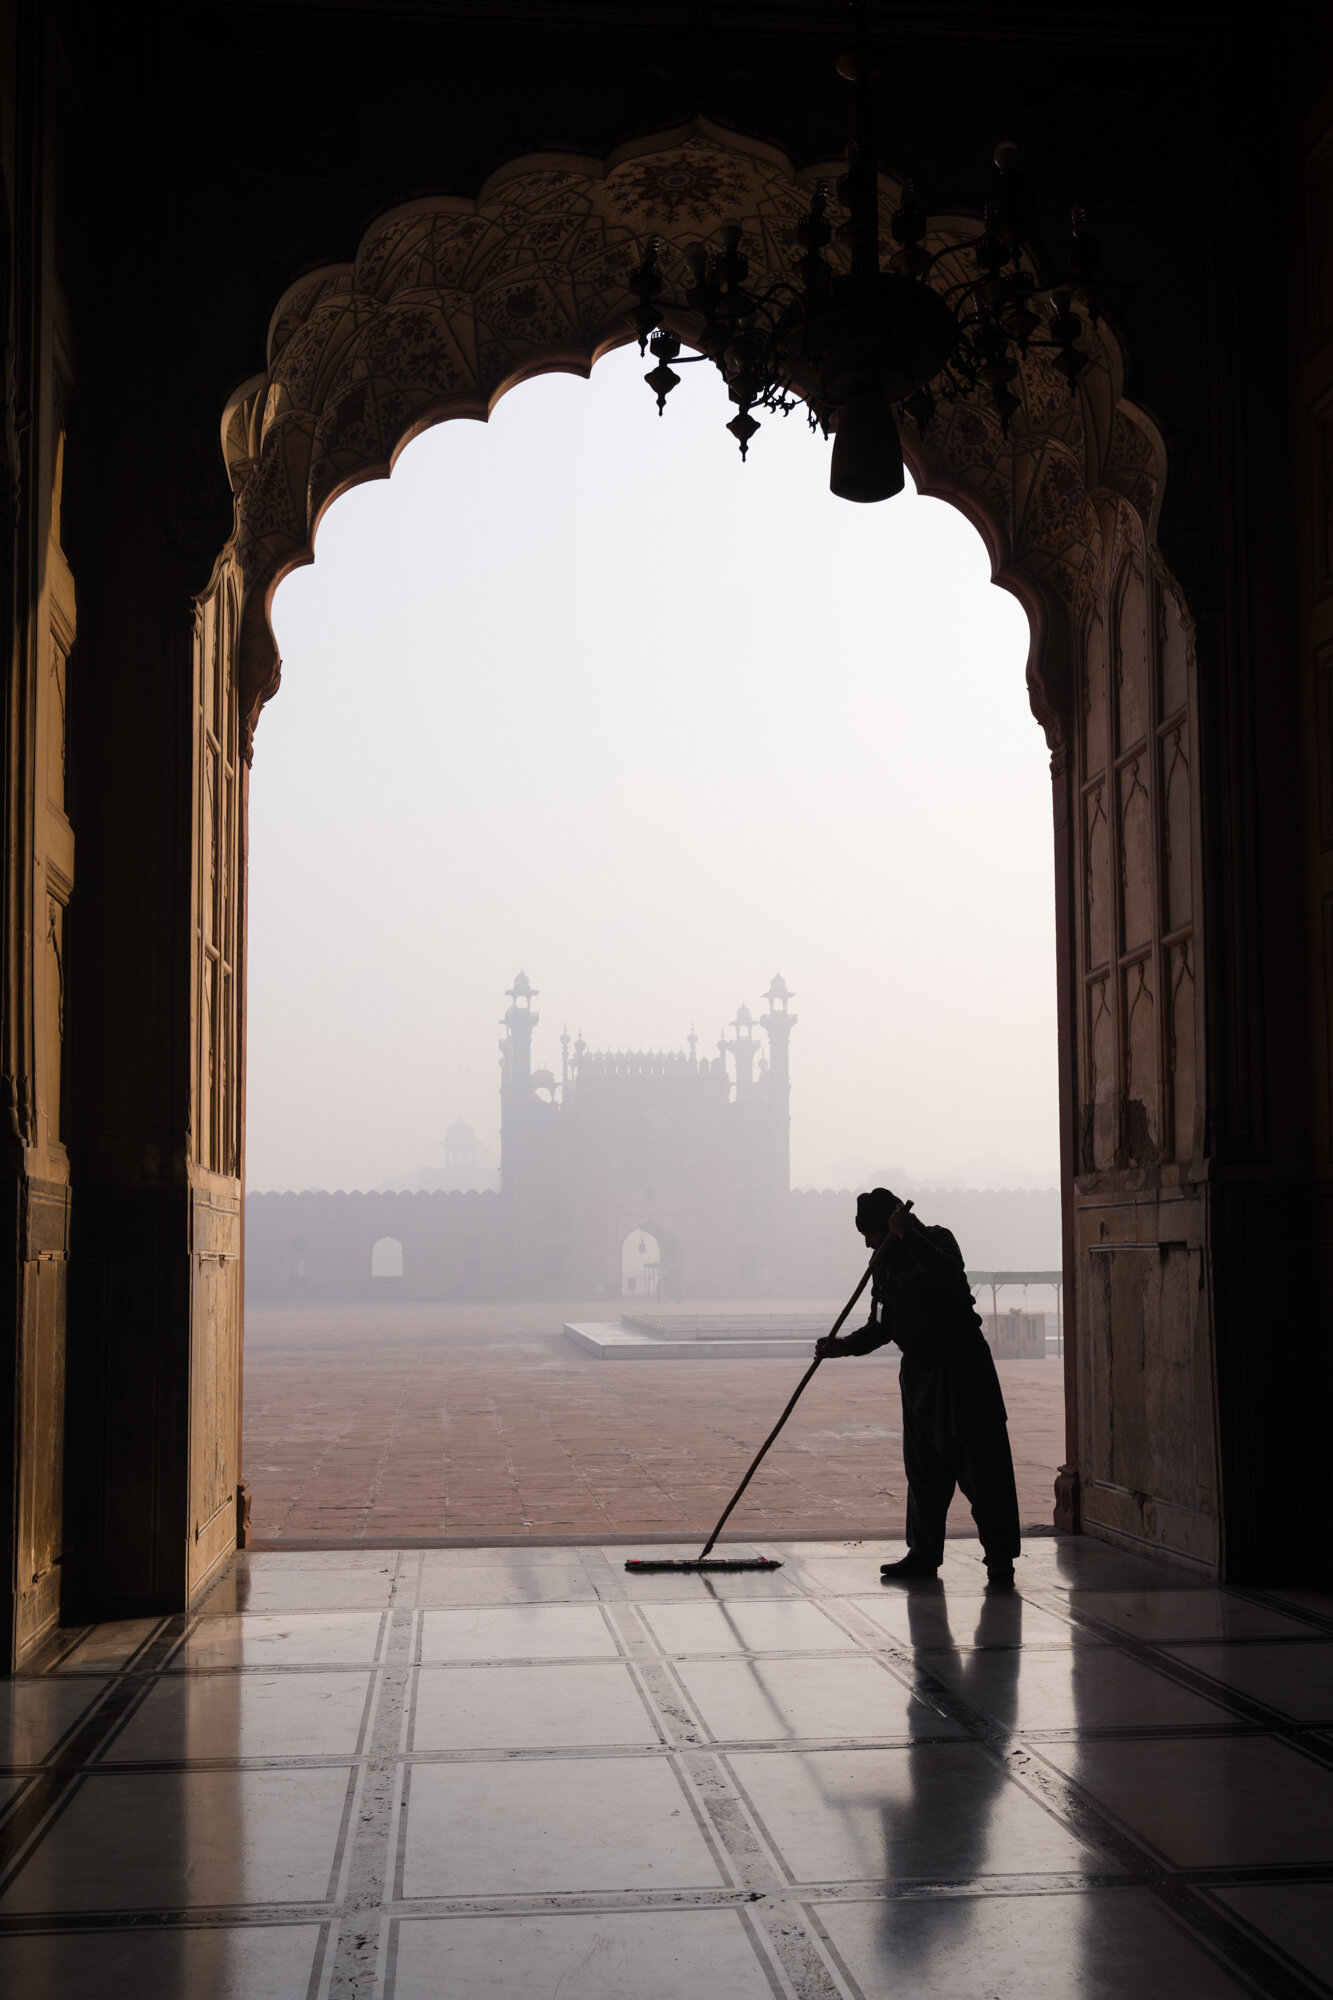  A man cleaning the floors before worshippers arrive 